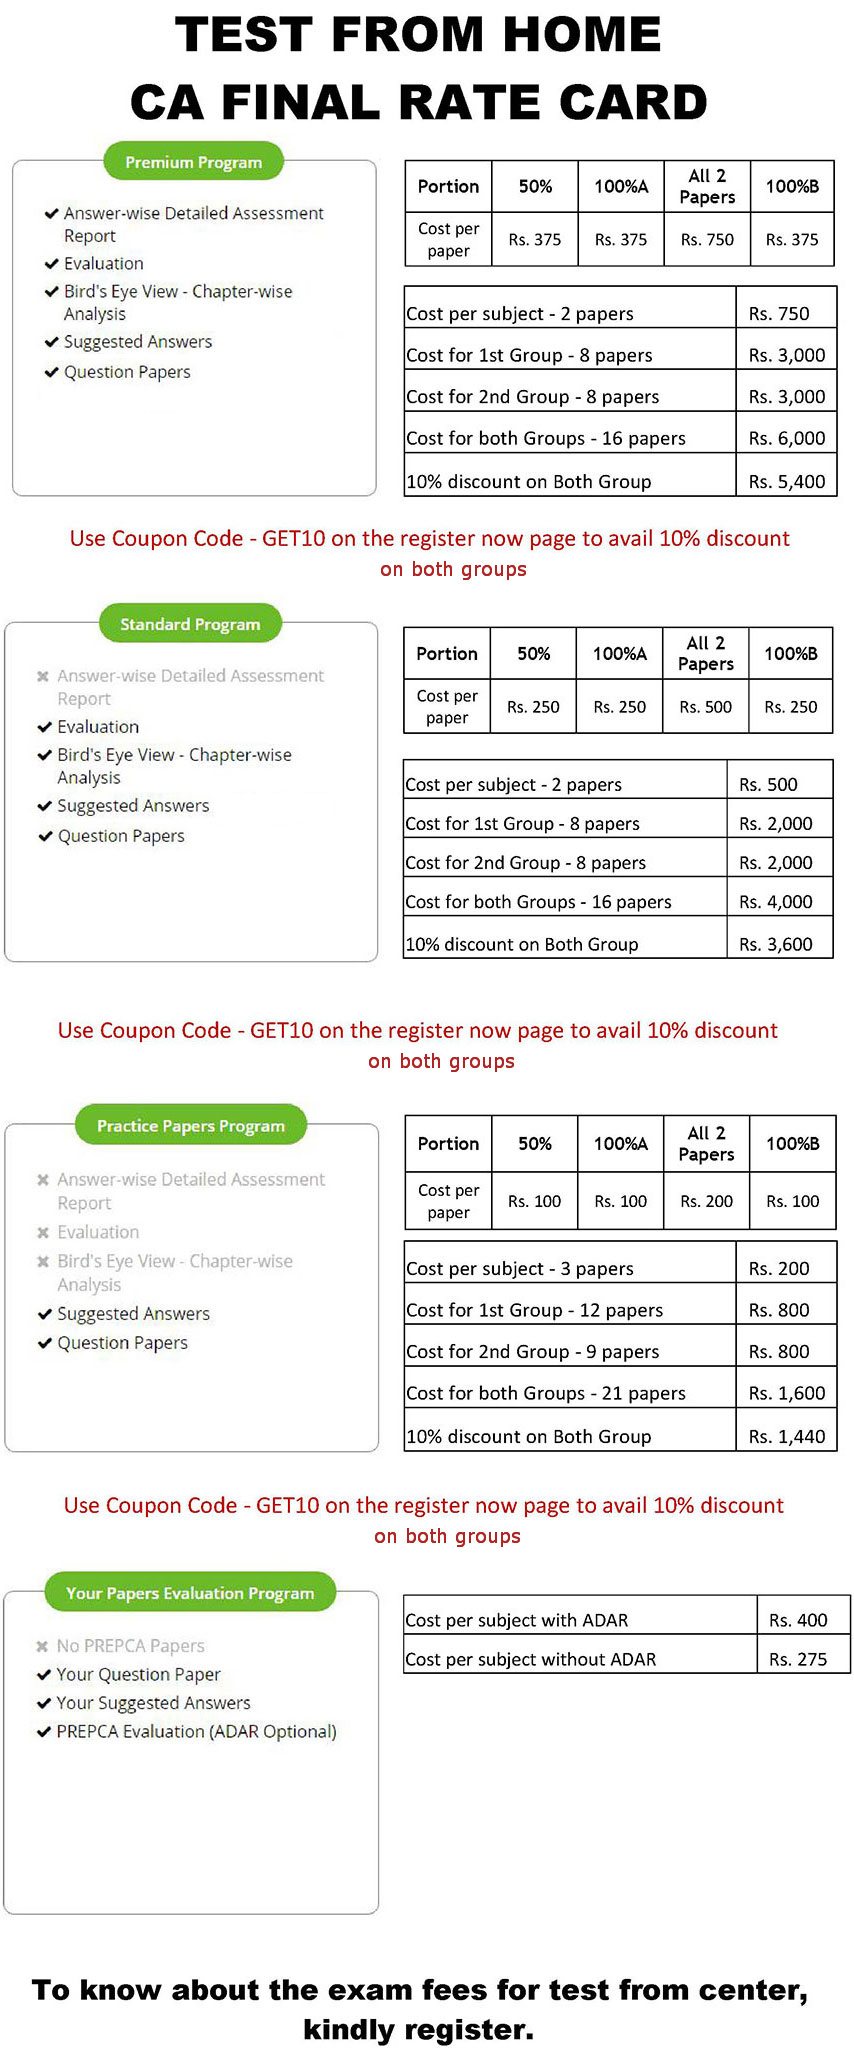 Test from home CA final rate card